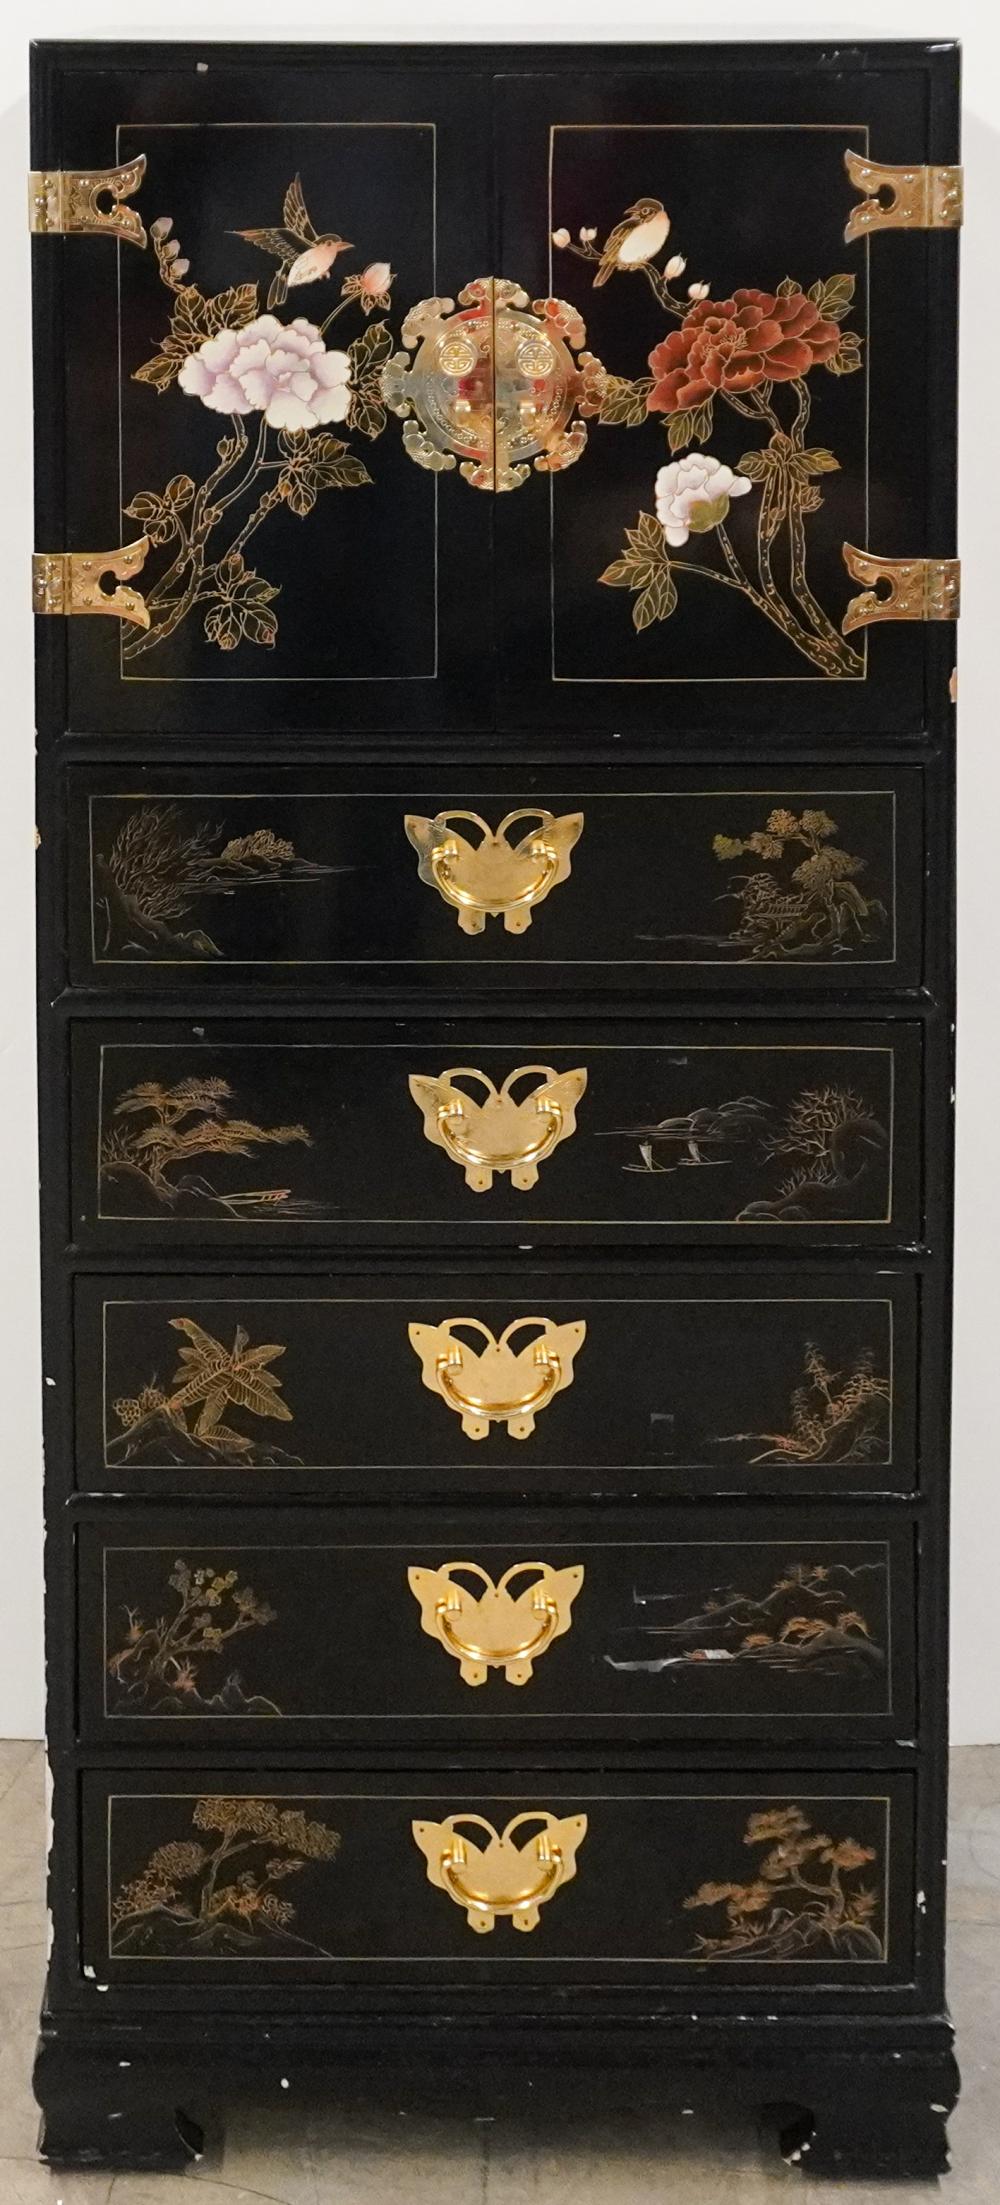 CHINOISERIE DECORATED BLACK LACQUERED 3b216c